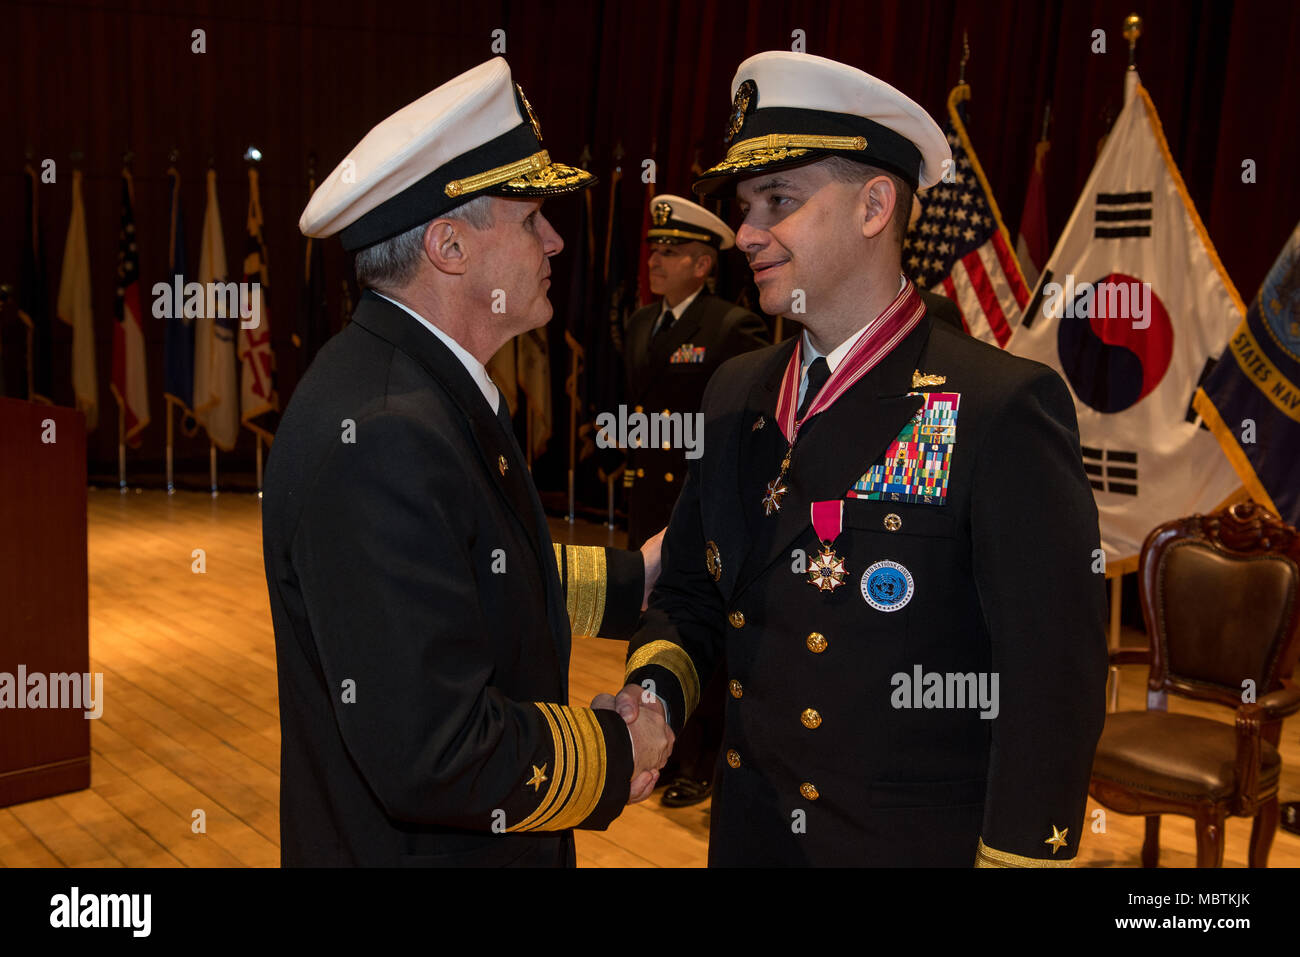 180111-N-TB148-107 Busan, Republic of Korea (Jan 11, 2018) - Vice Adm. Phil J. Sawyer, commander, U.S. Seventh Fleet presents the Legion of Merit to Rear Adm. Brad Cooper, commander, U.S. Naval Forces Korea (CNFK) during a change of command ceremony at CNFK headquarters. During the ceremony Rear Adm. Michael E. Boyle relieved Rear Adm. Brad Cooper, becoming CNFK’s 36th commander. (U.S. Navy photo by Mass Communication Specialist William Carlisle/ Released) Stock Photo